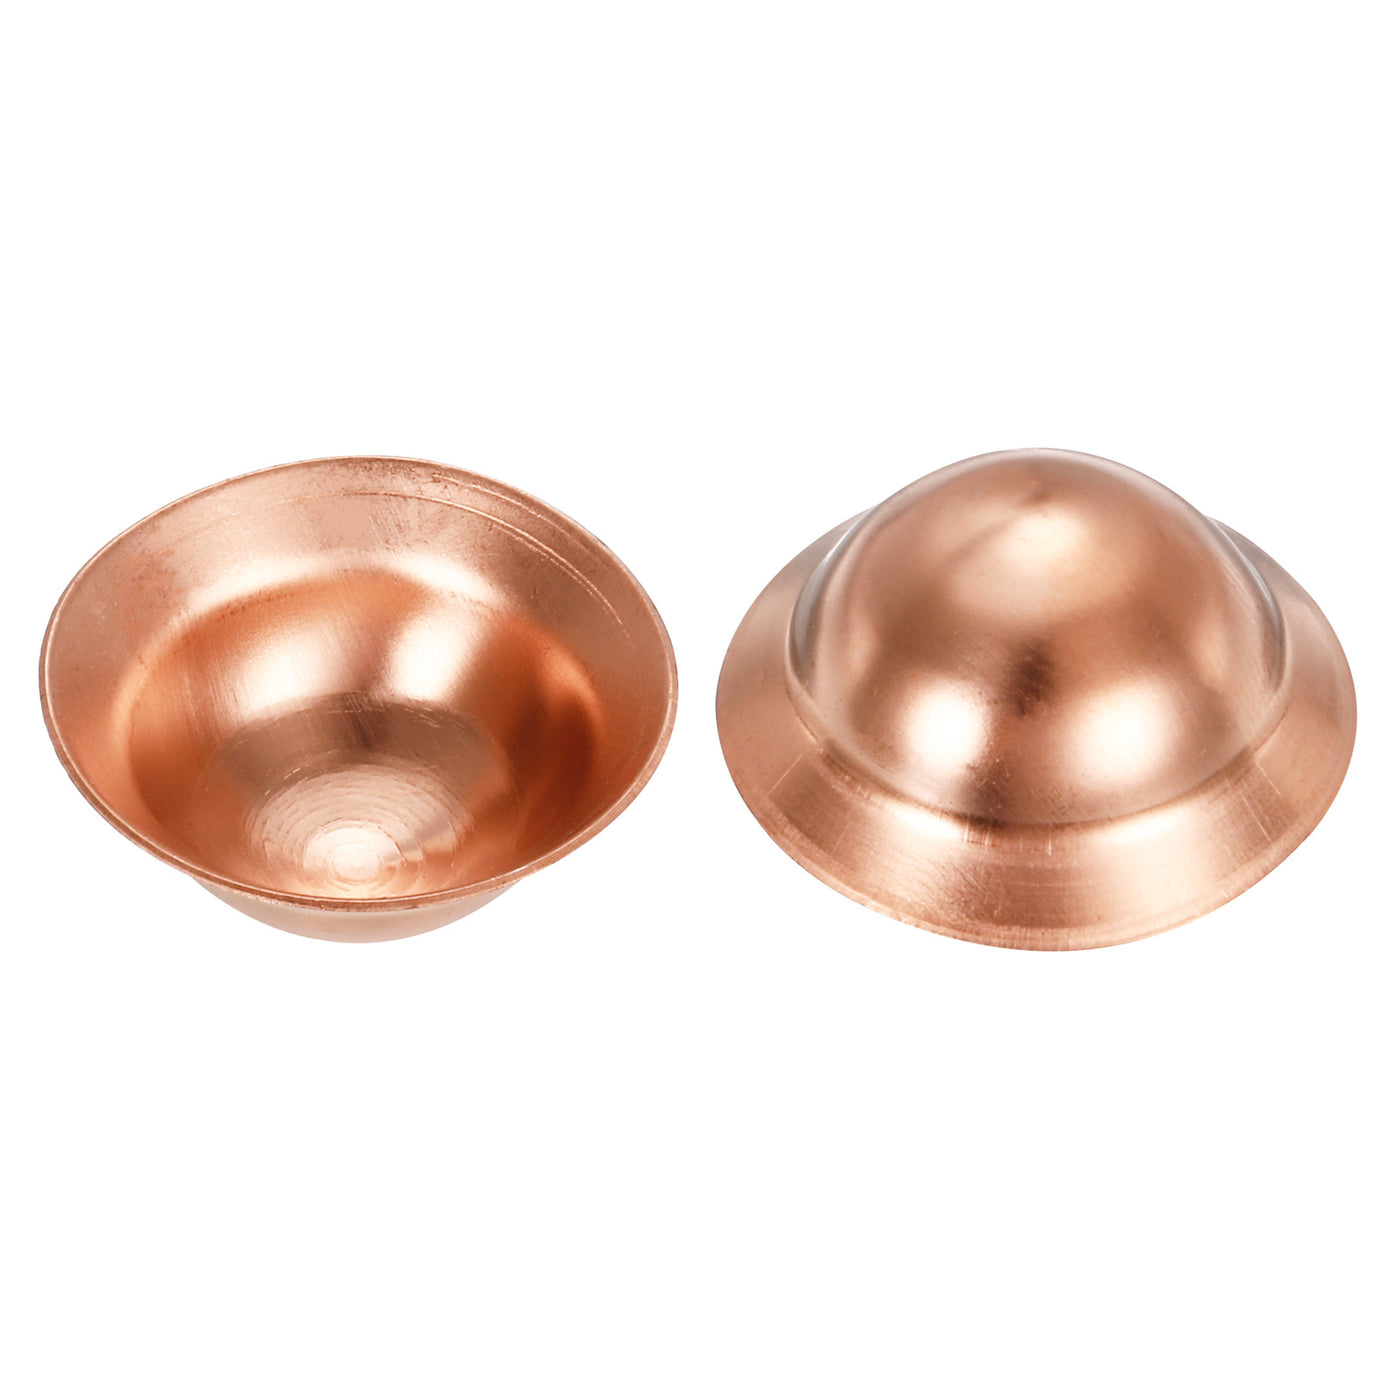 Harfington Copper End Cap Pipe Fitting Plug Connection Gasket Fit for 3/4" Flare Nuts, for HVAC, Air Conditioning Refrigeration System, Pack of 20